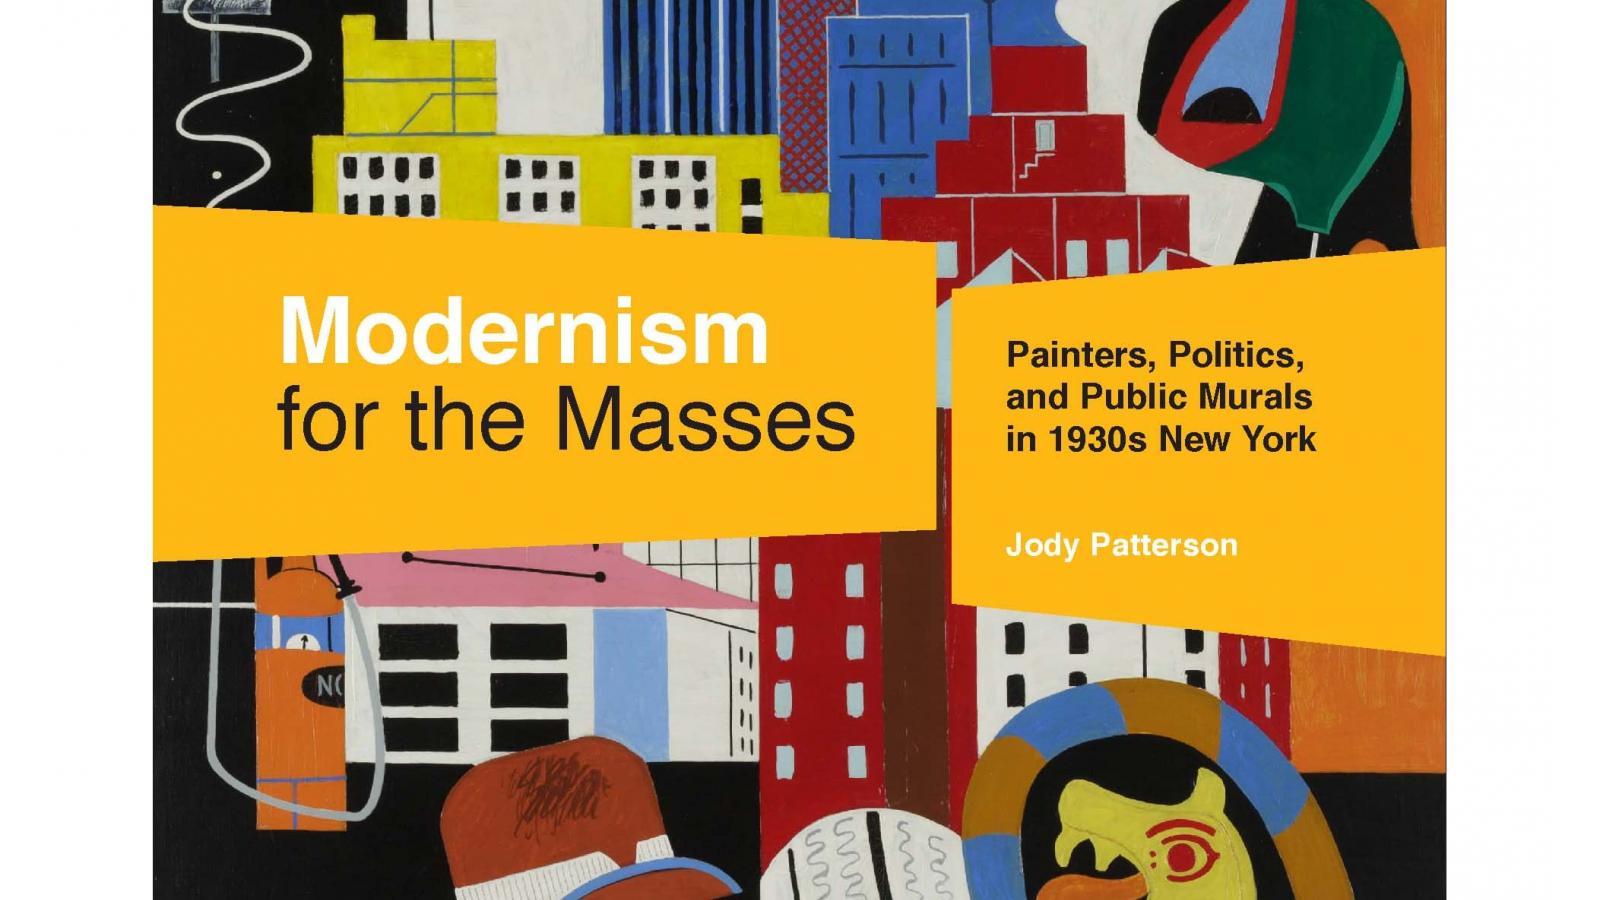 Patterson "Modernism for the Masses"